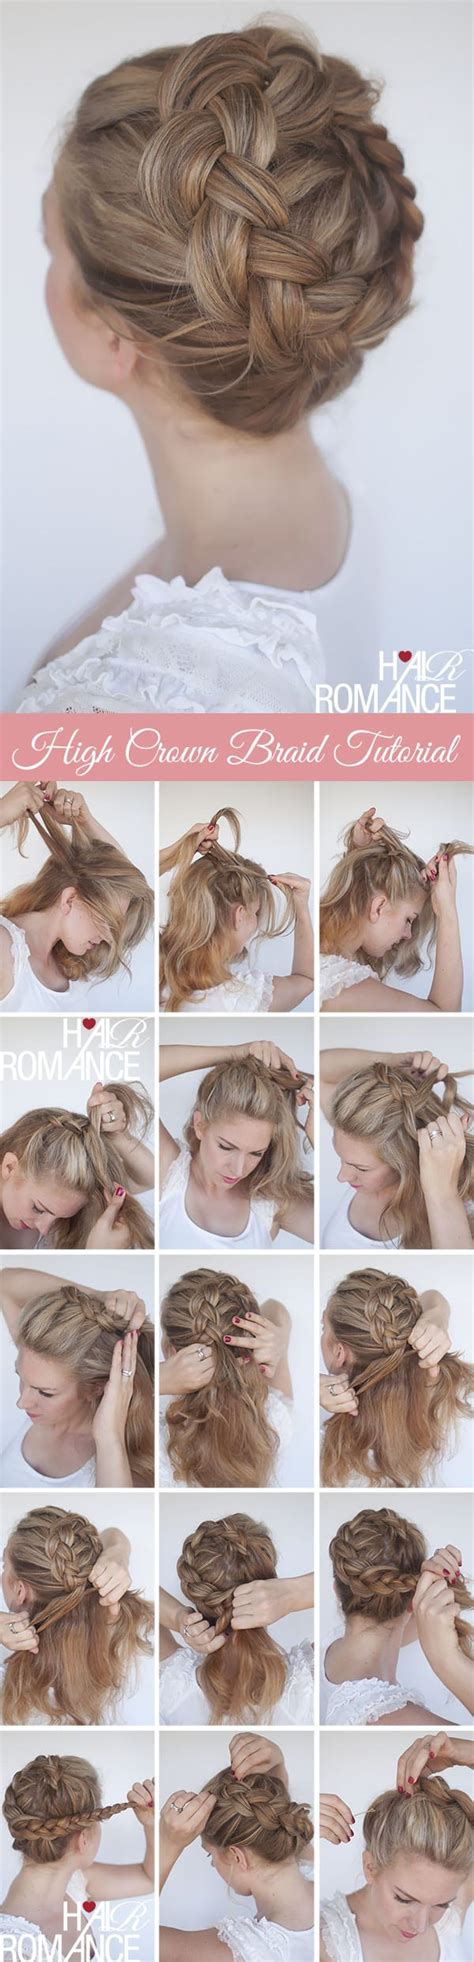 A simple diy hairstyle that is beautiful and can be worn for any occasion. 17 Easy DIY Tutorials For Glamorous and Cute Hairstyle